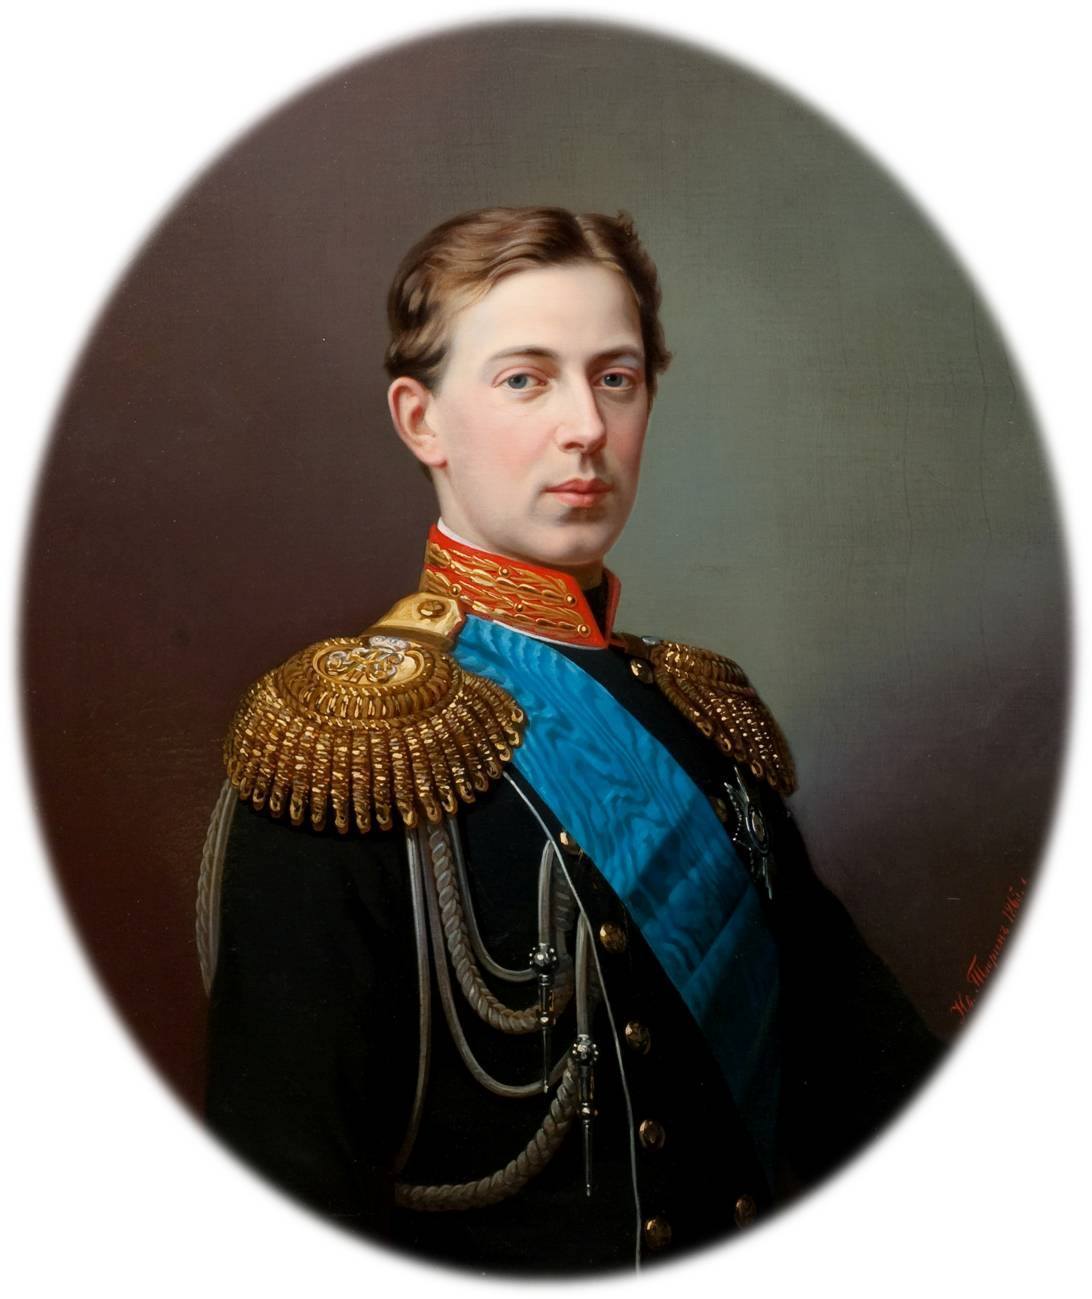 imperial-russia: Tsarevich Nicholas Alexandrovich The handsome and incredibly gifted